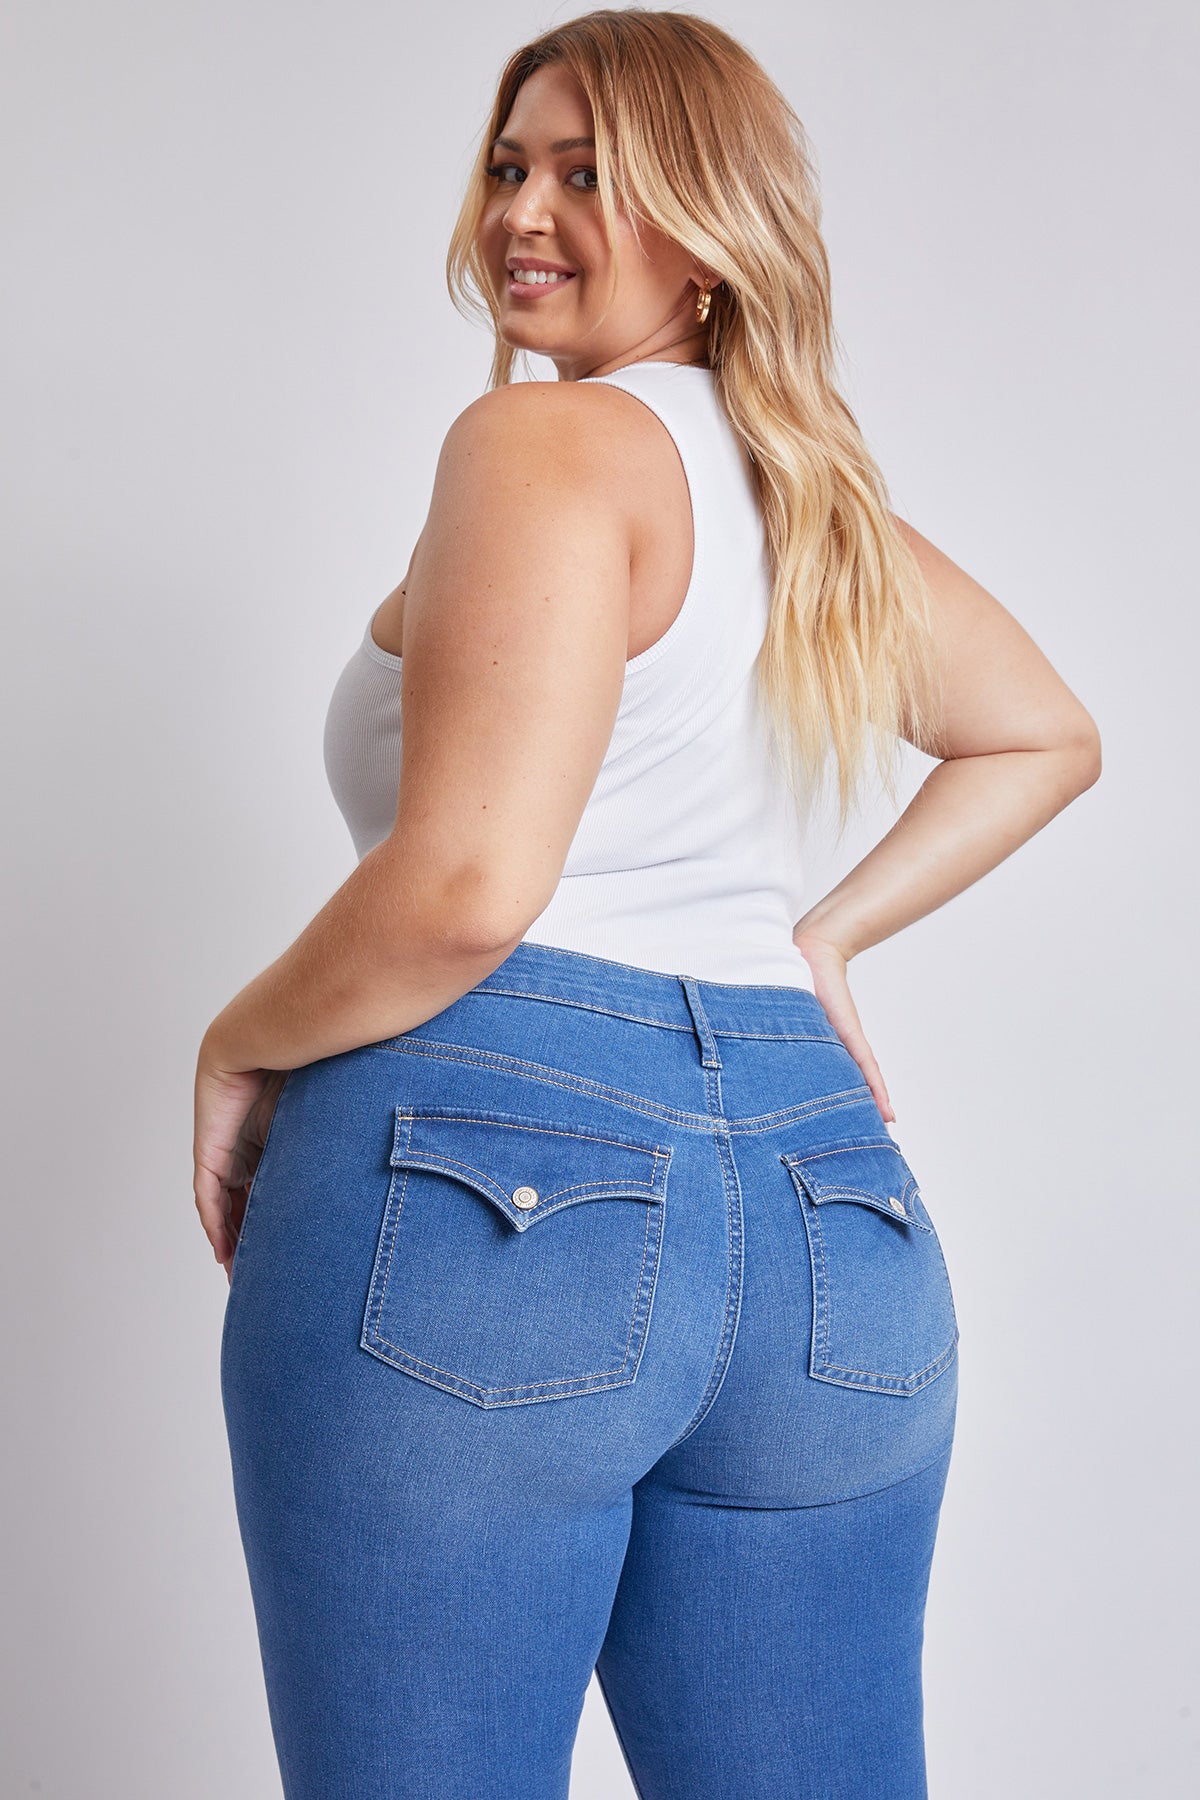 Missy Plus Size Sustainable Mid Rise Boot Cut Jeans